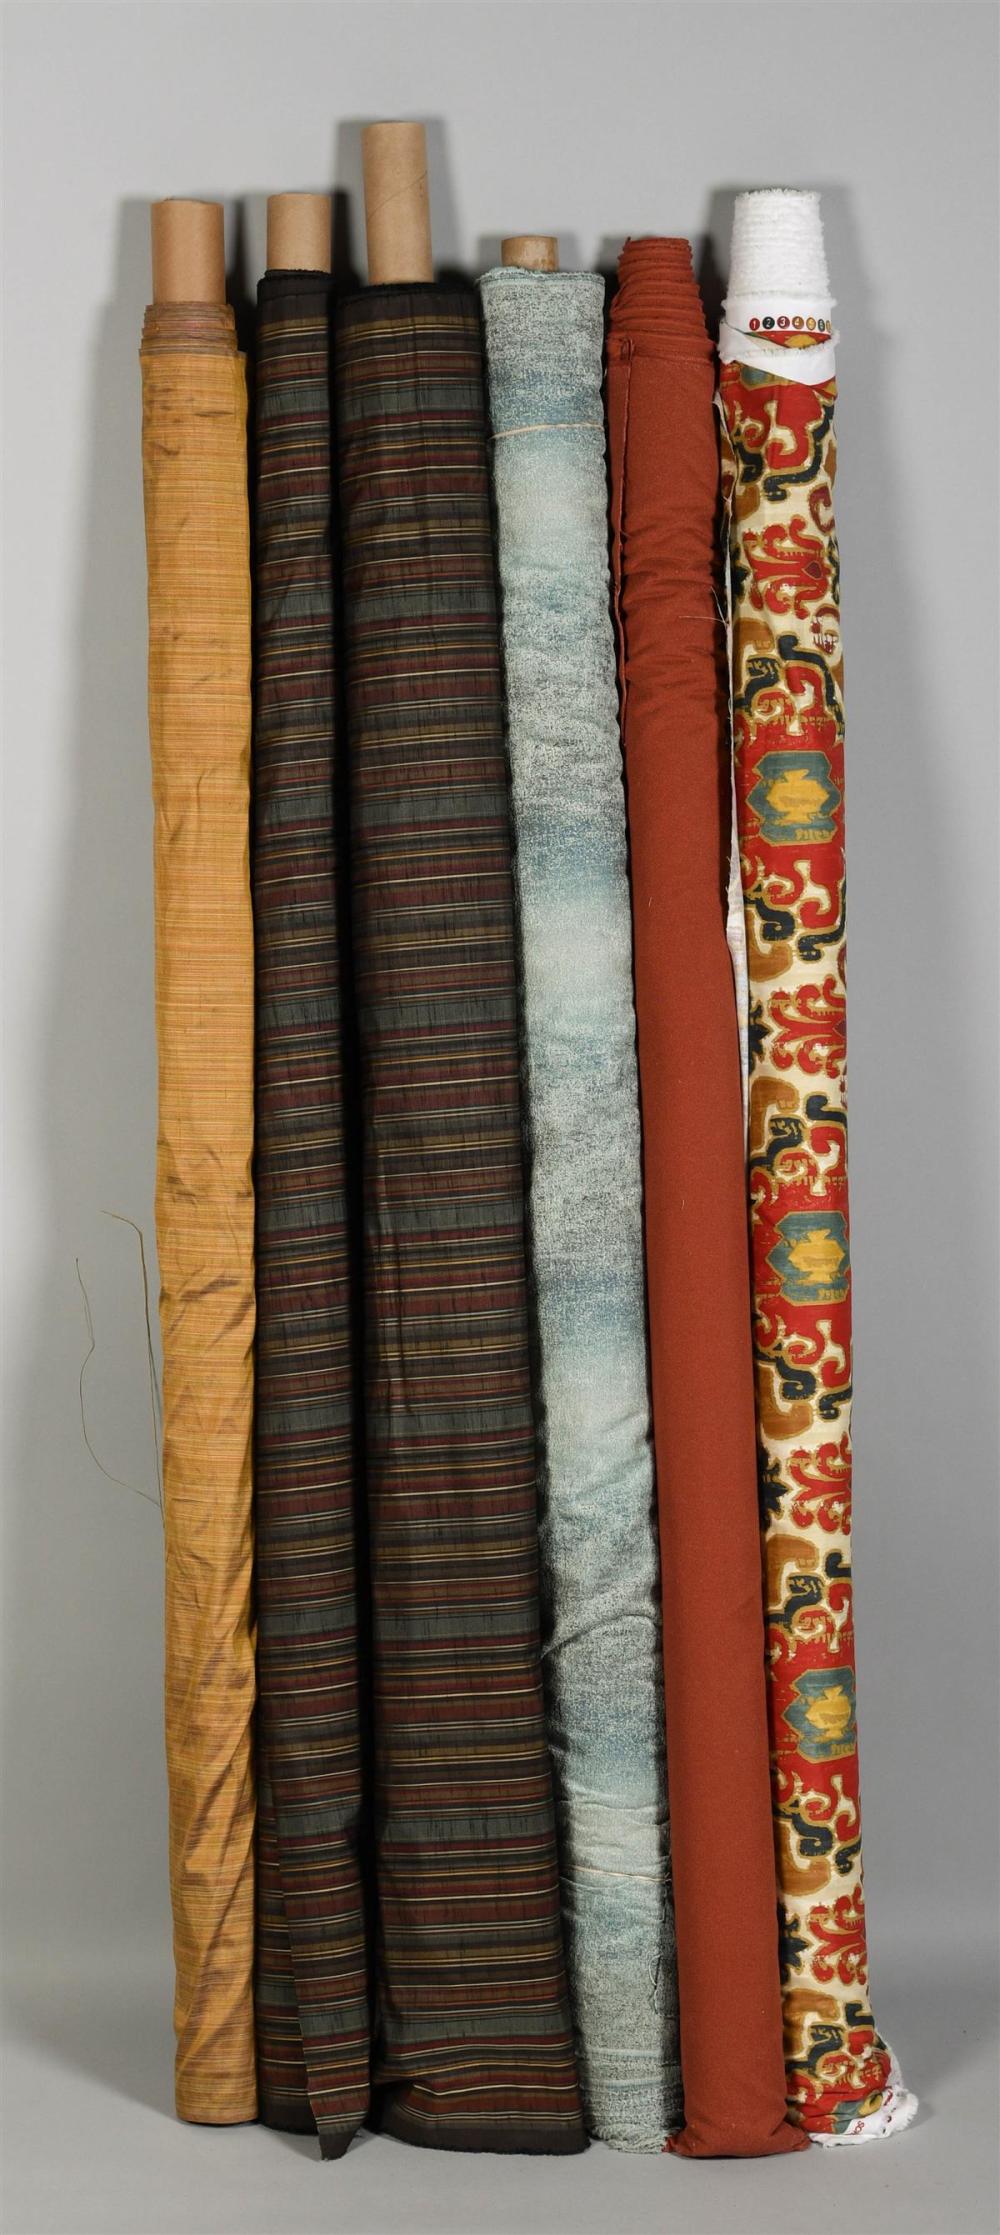 GROUP OF SIX ASSORTED FABRIC LENGTHSGROUP 33c25a